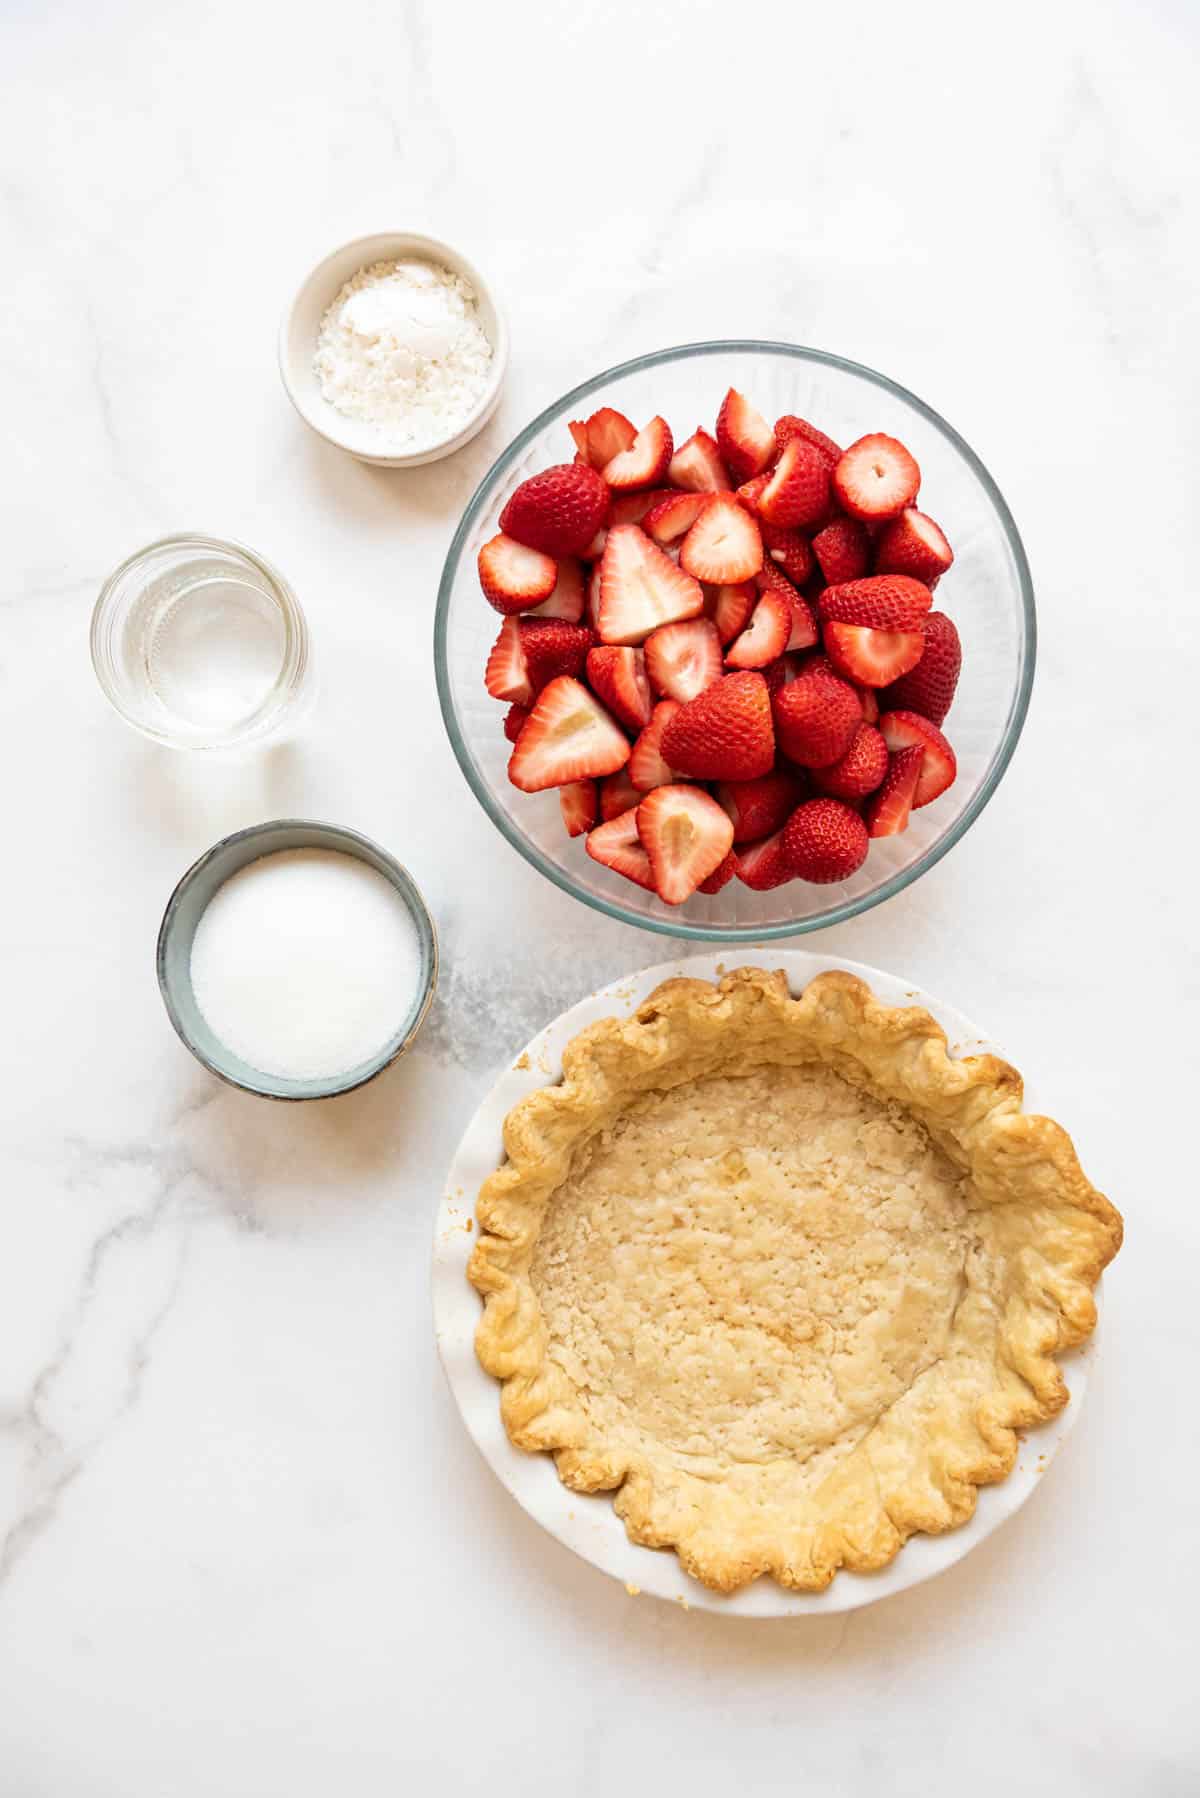 Ingredients for a fresh strawberry pie.